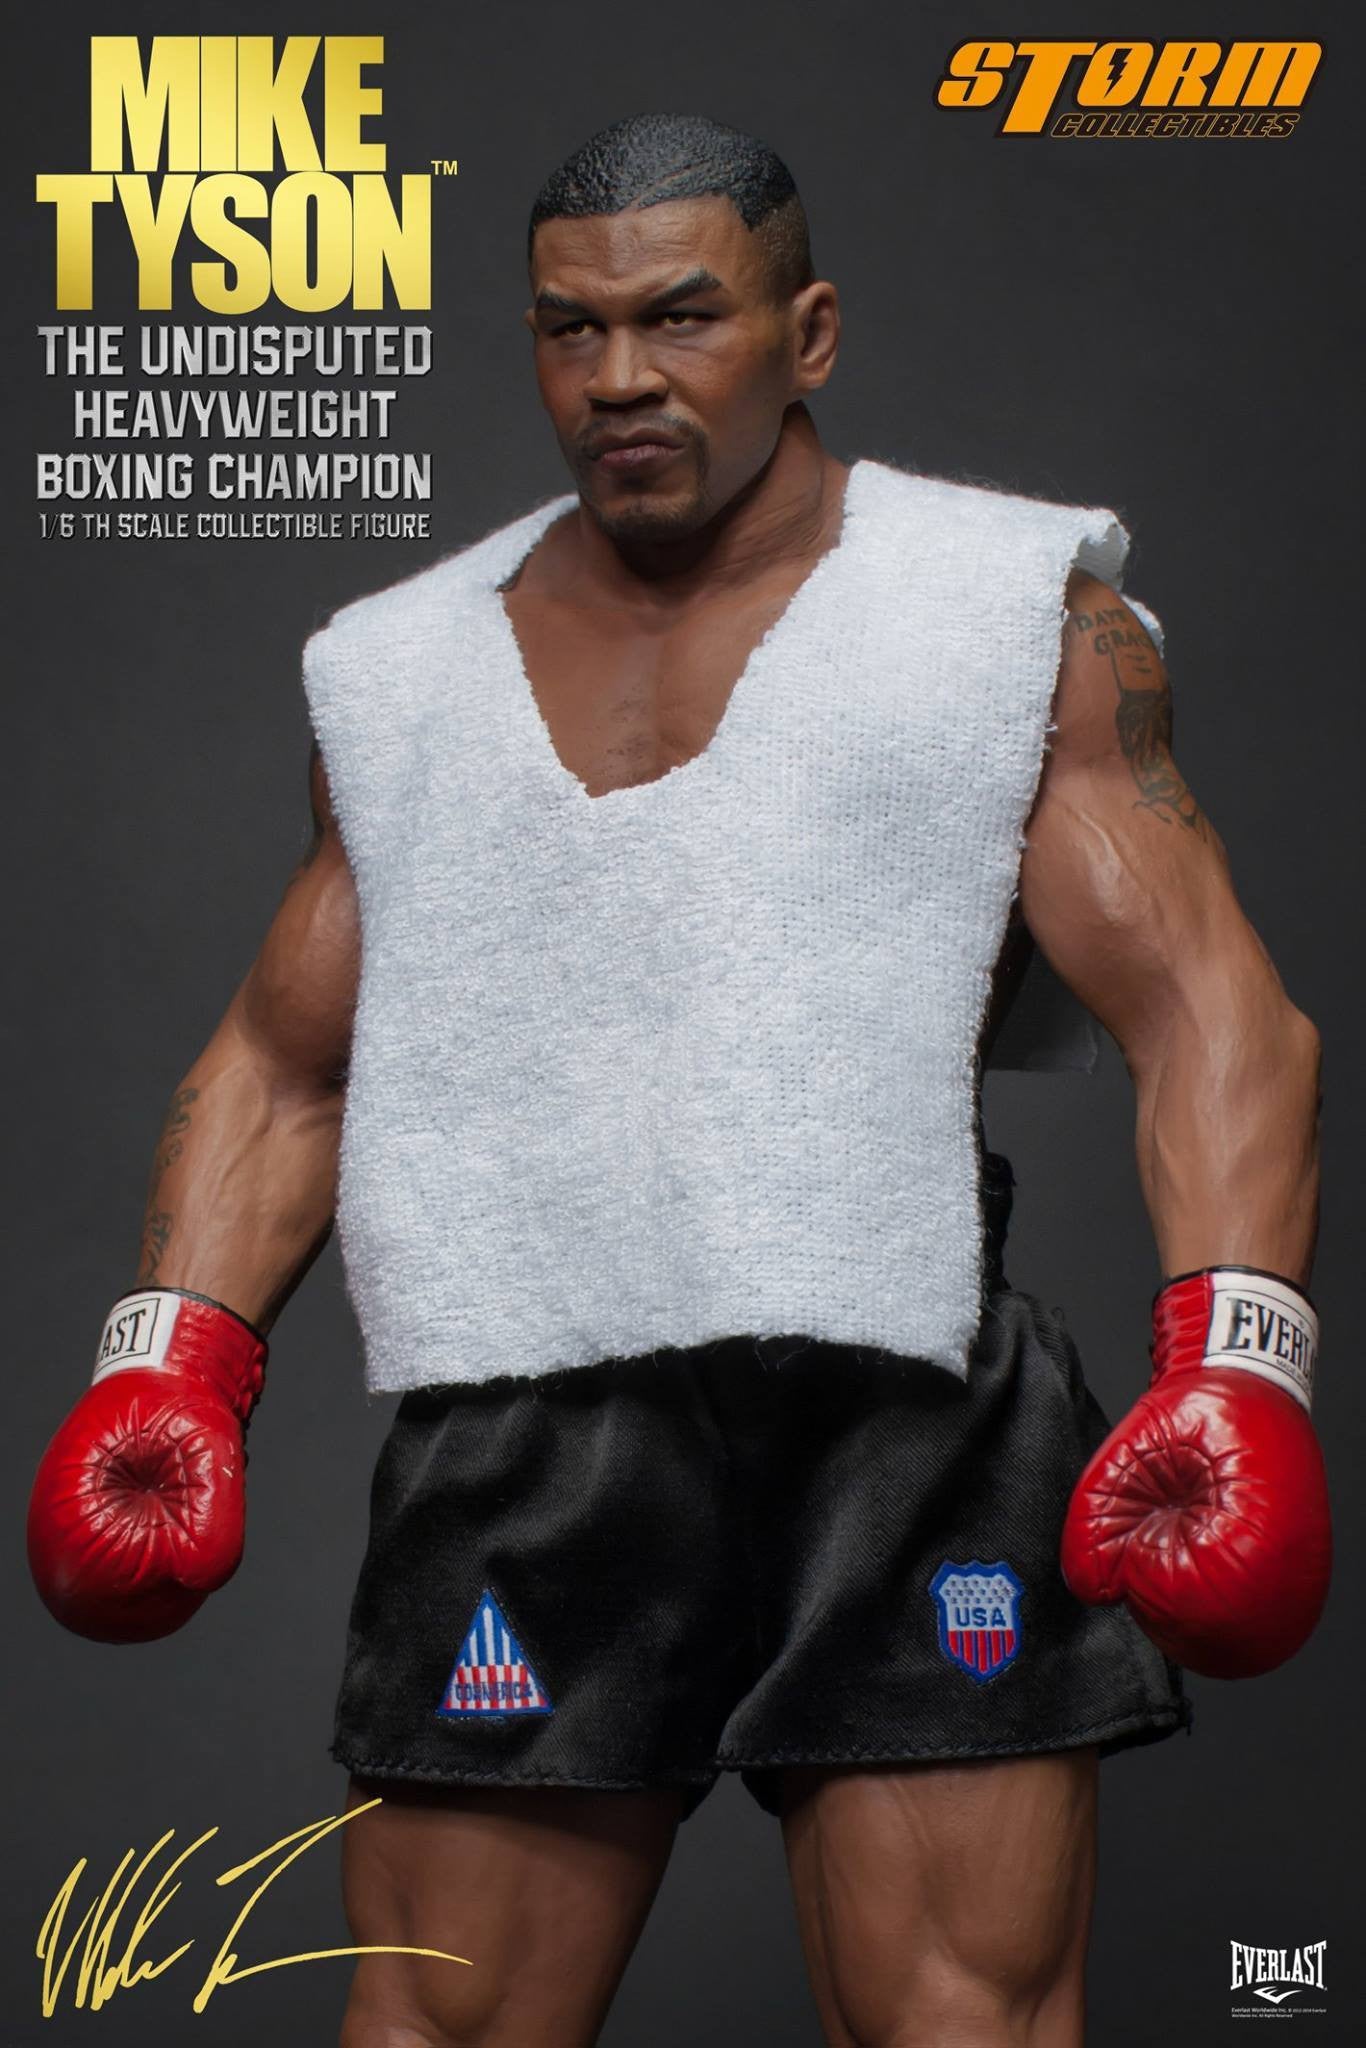 Storm Collectibles - 1:6 Scale Collectible Figure - Mike Tyson "The Undisputed Heavyweight Boxing Champion" - Marvelous Toys - 9